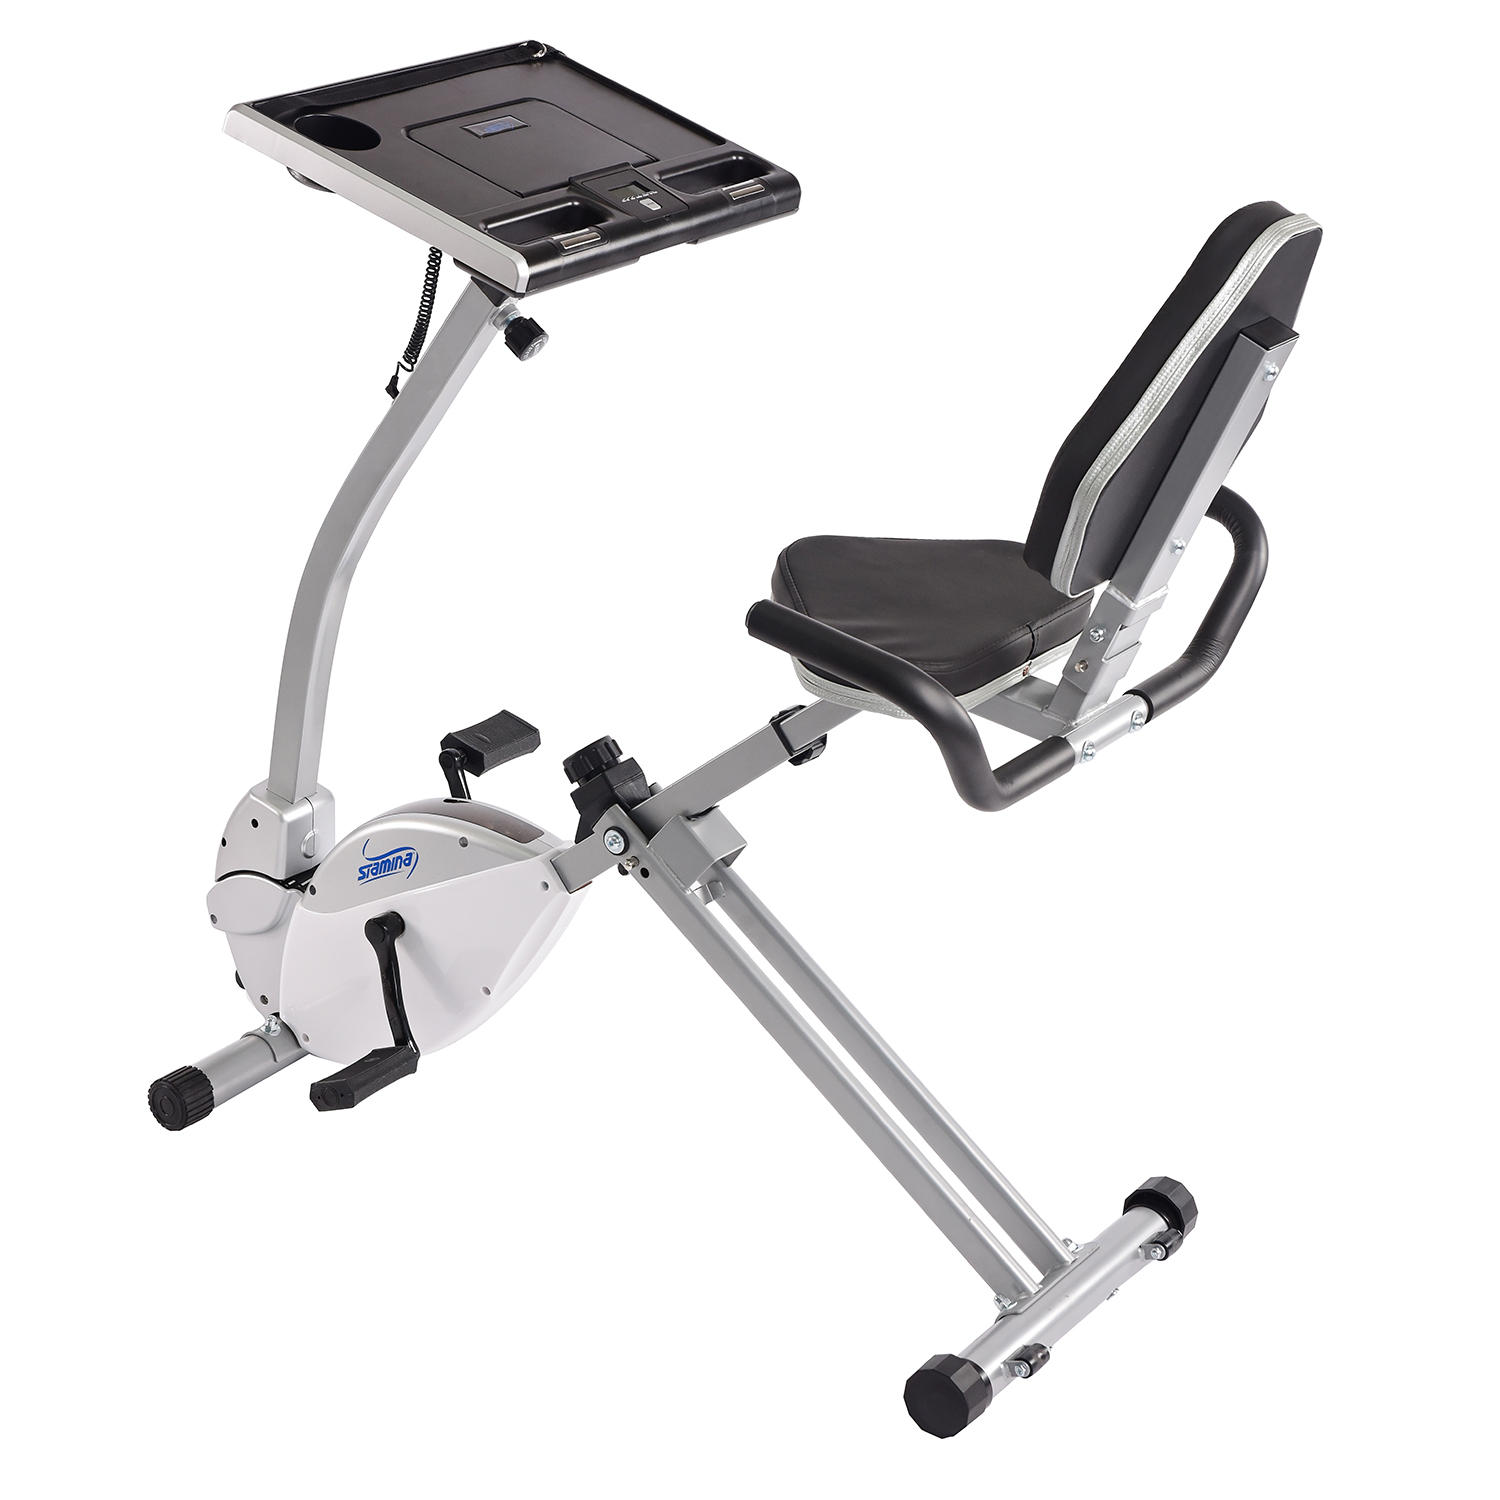 Stamina 15-0321 2-in-1 Recumbent Exercise Bike Workstation and Standing Desk